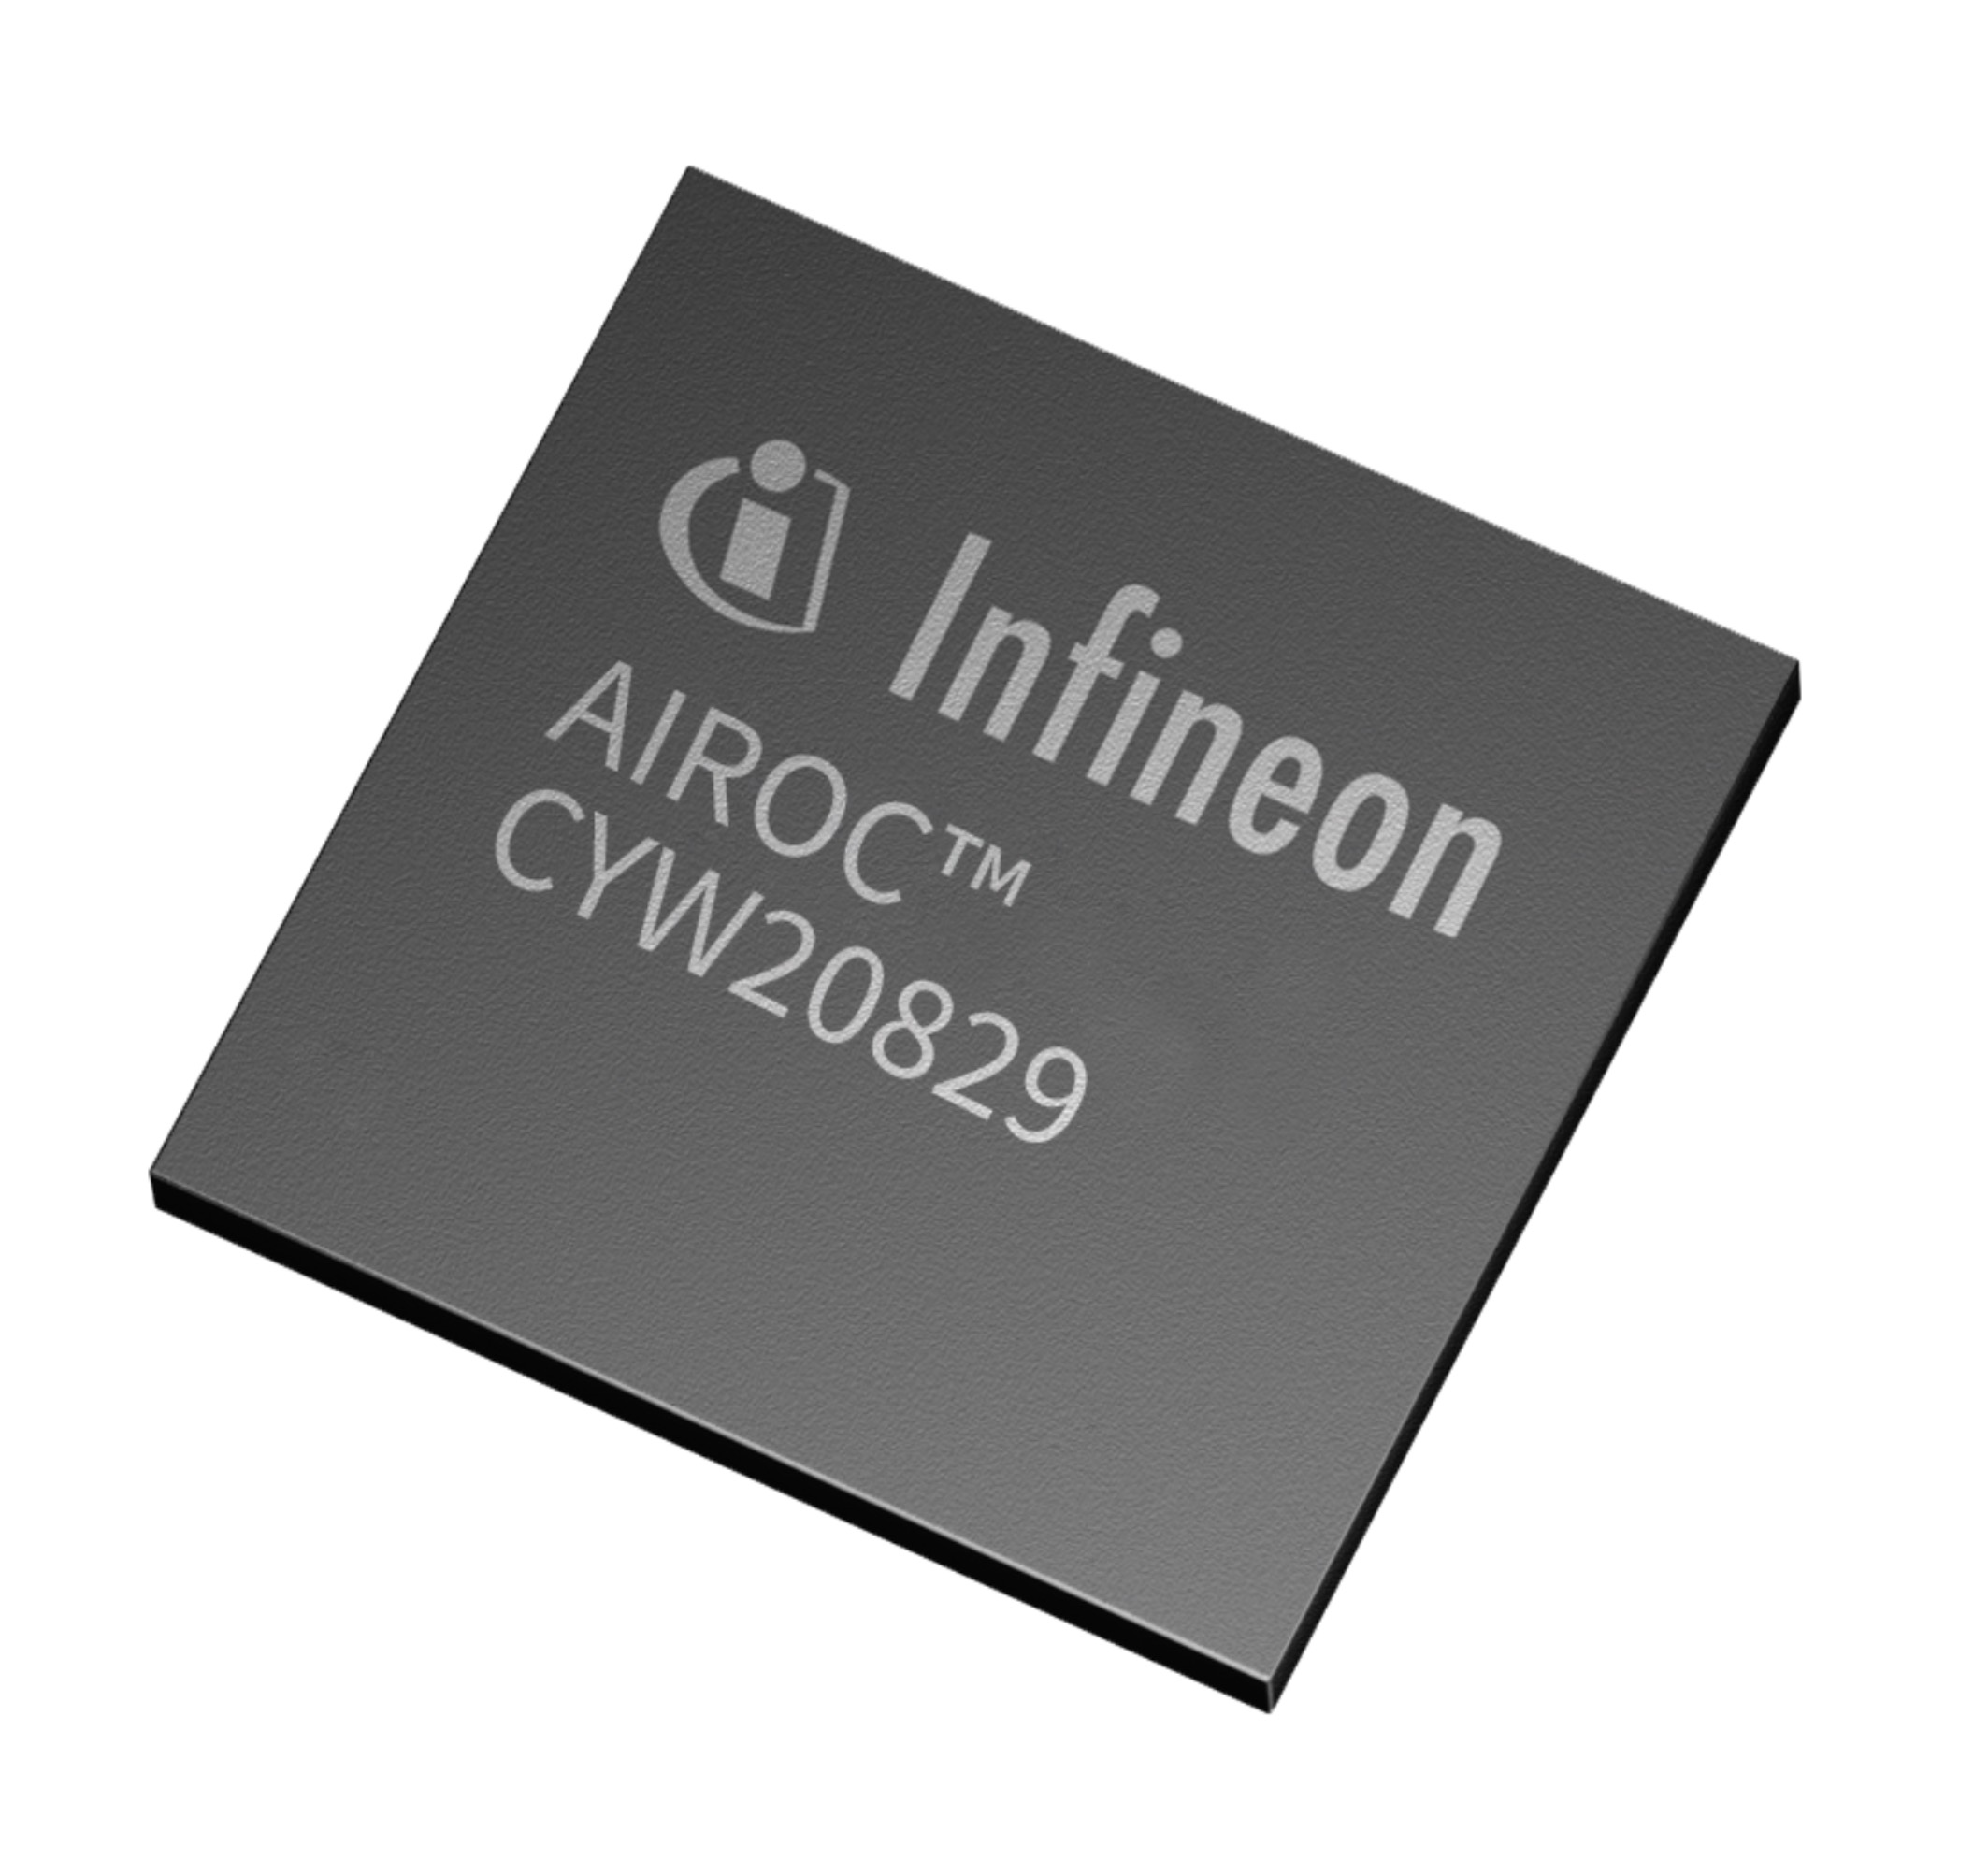 Infineon AIROC CYW20829 Bluetooth LE SoC Ready with Latest Bluetooth 5.4 Specification